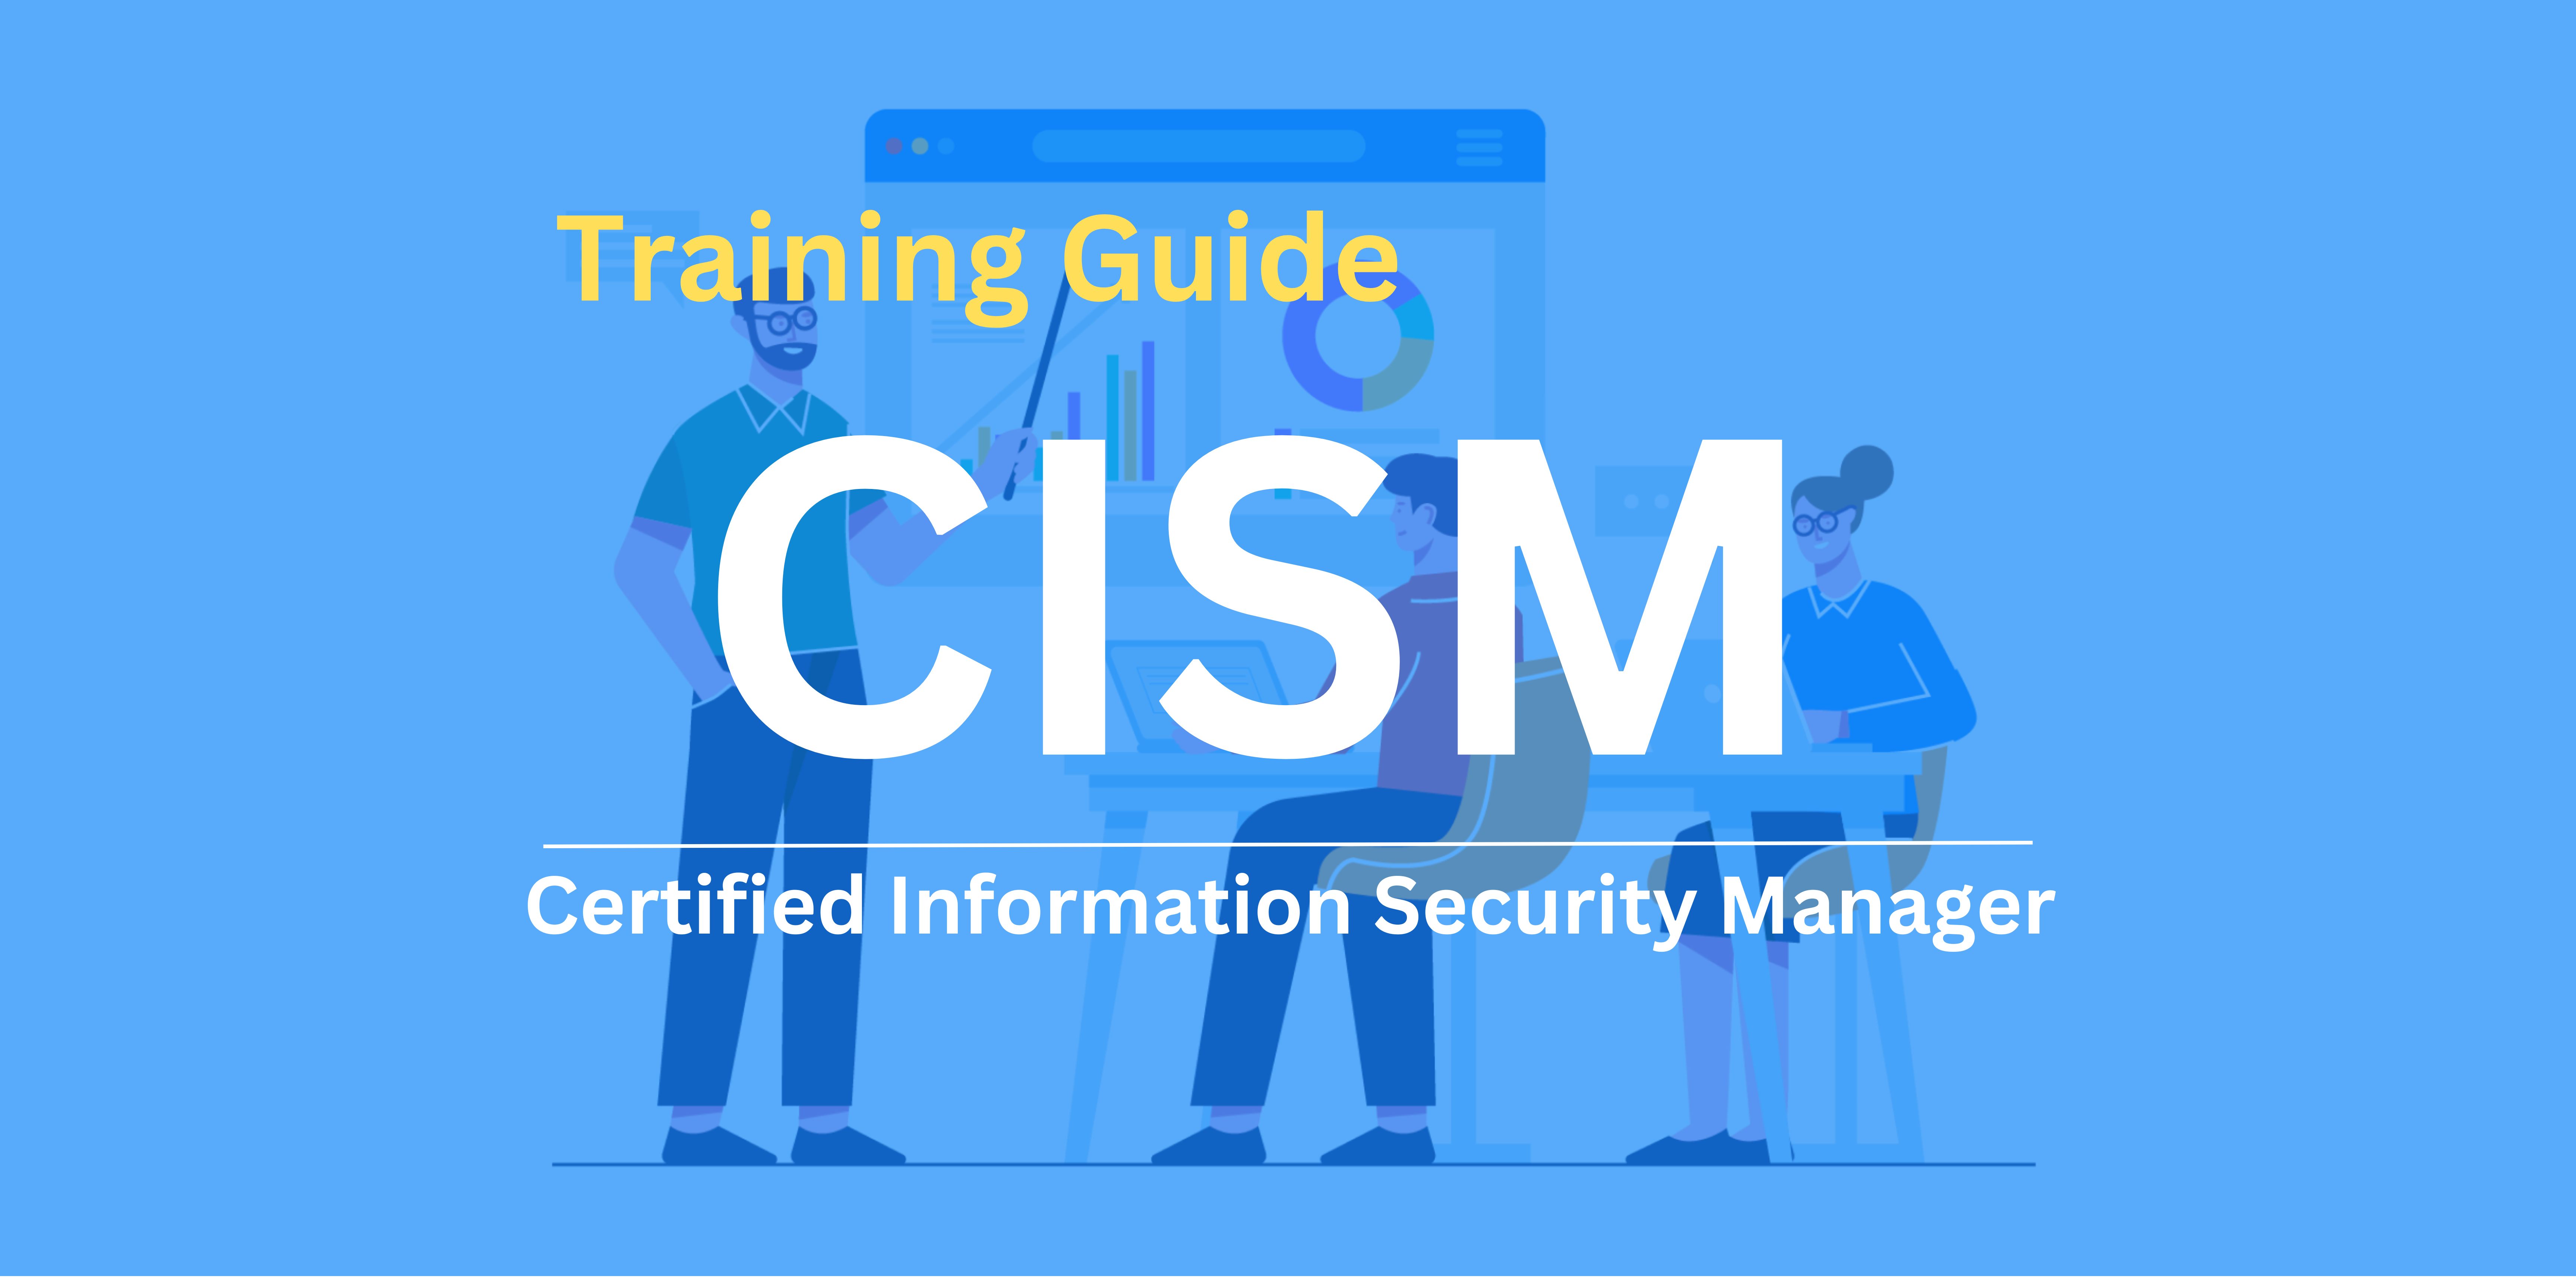 CISM Certification Training: To be a Certified Information Security Manager